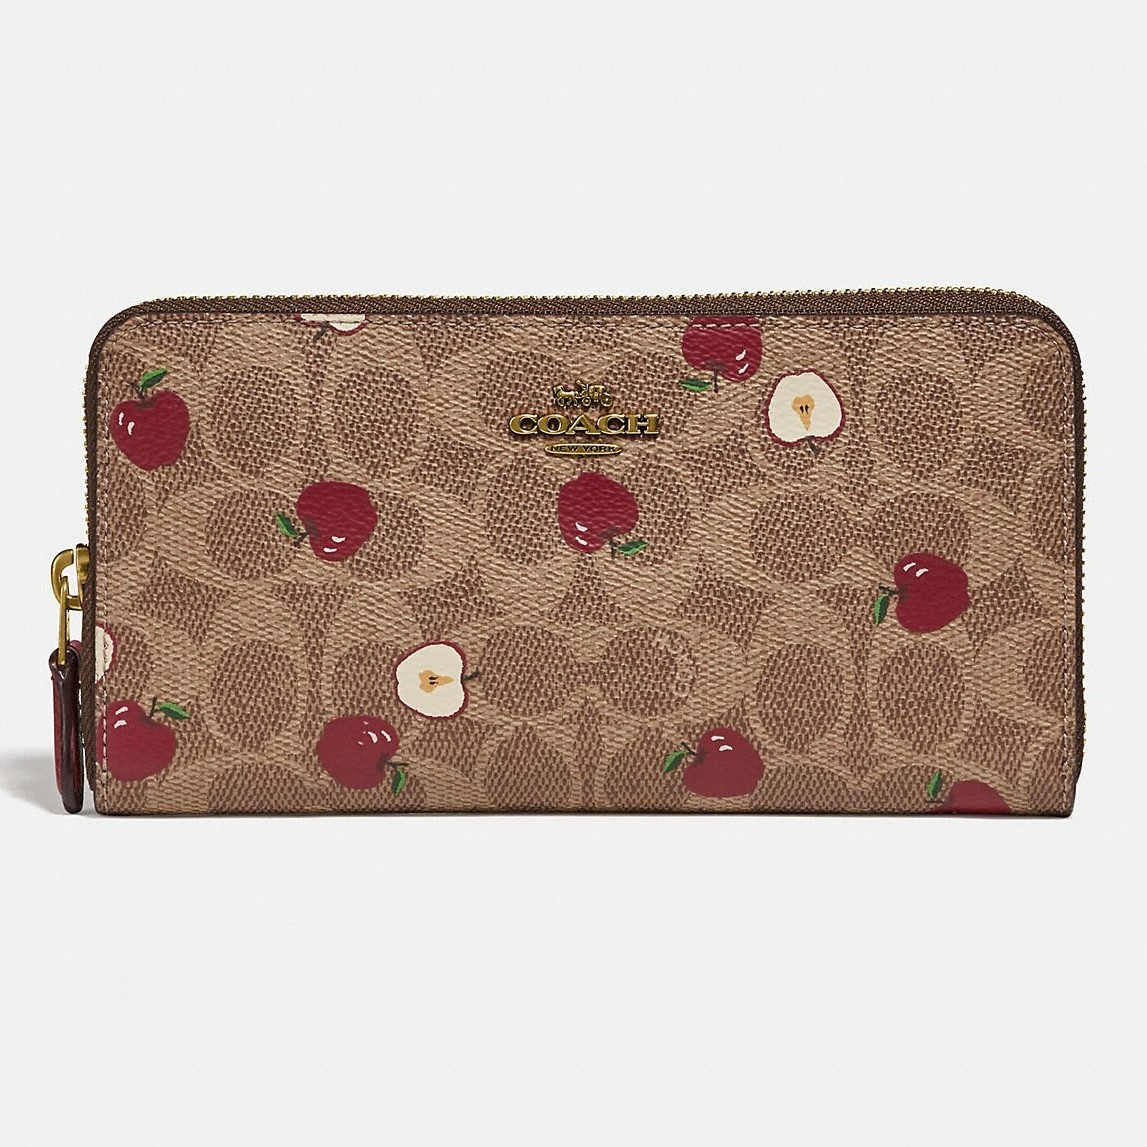 VÍ DÀI NỮ COACH TRÁI TÁO ĐỎ ACCORDION ZIP WALLET IN SIGNATURE CANVAS WITH SCATTERED APPLE PRINT 2